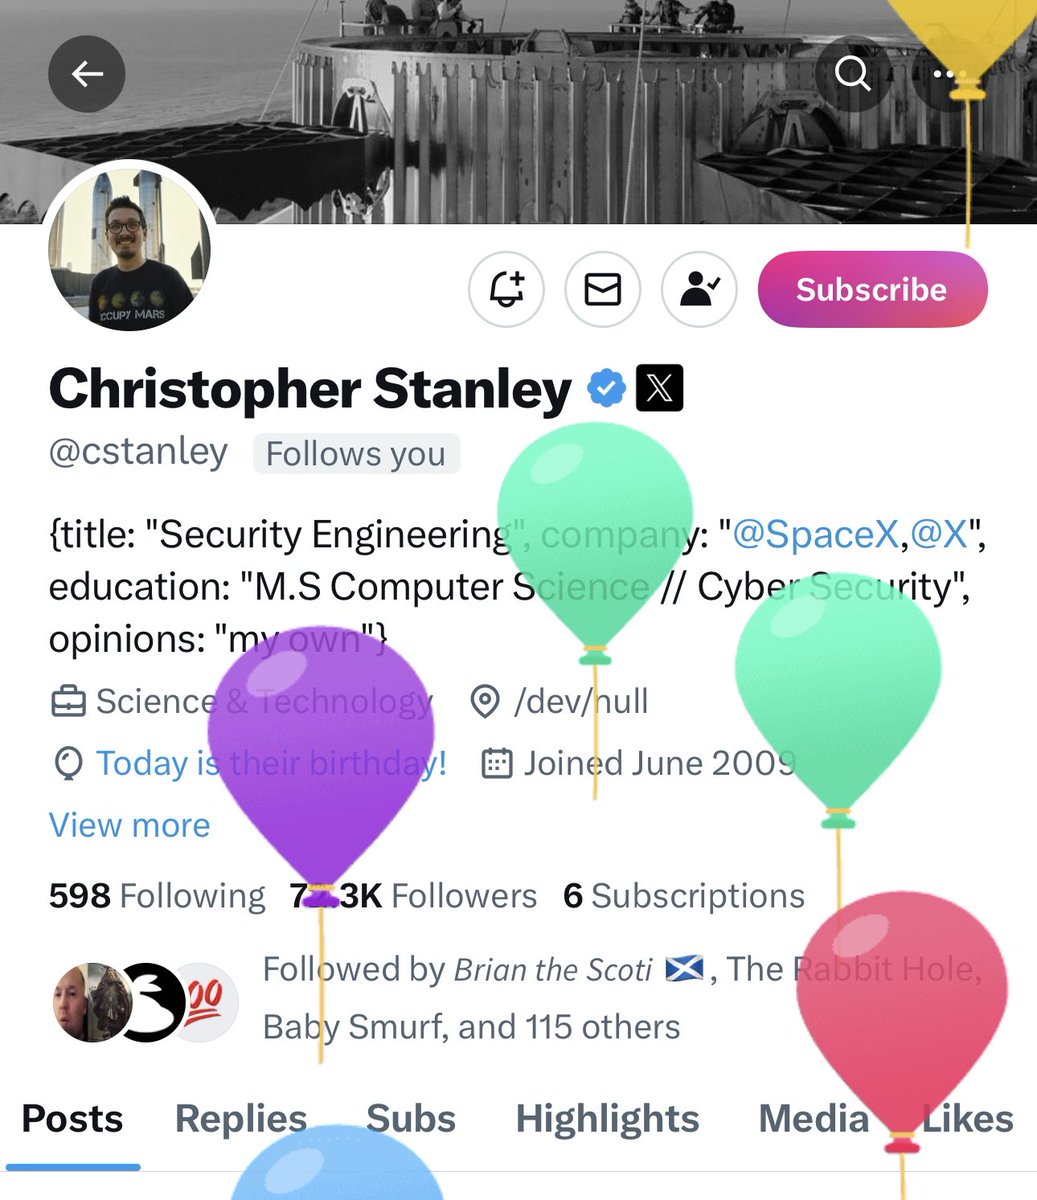 Happy Birthday to @cstanley! One of the sweetest X employees. @elonmusk should give him a raise.